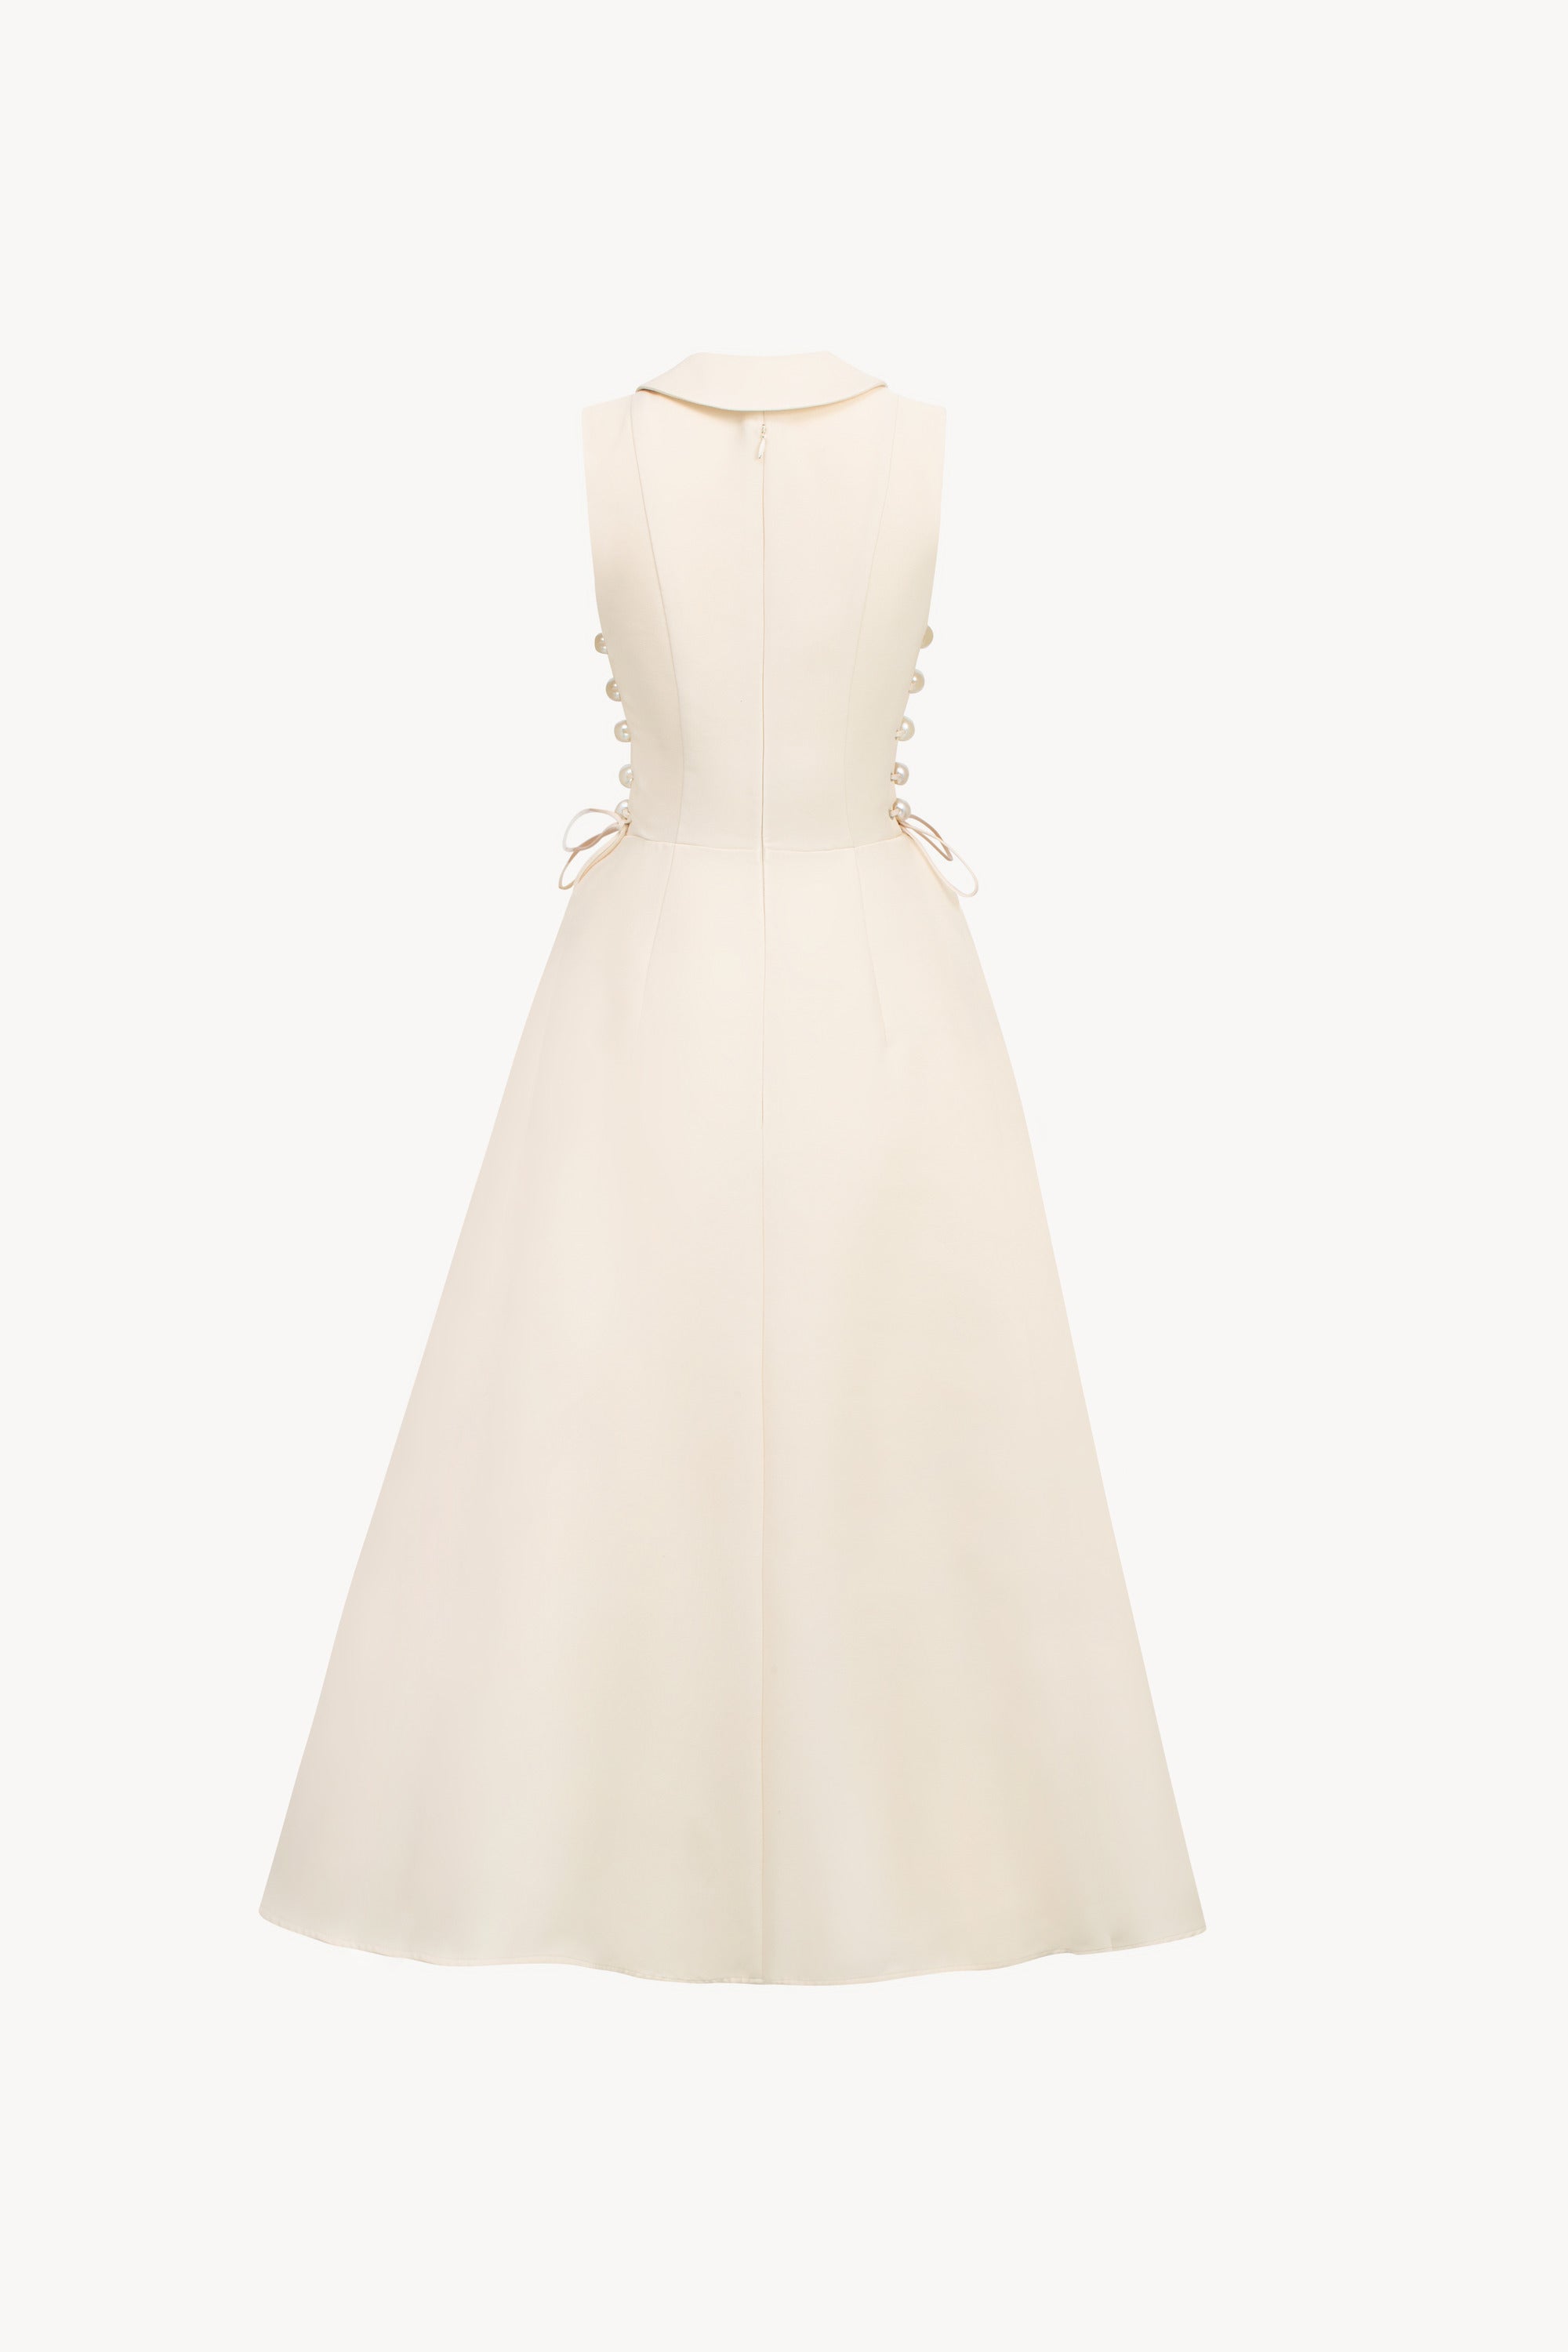 DUCHESS Lace-up with pearl Midi Dress – GIANA official website